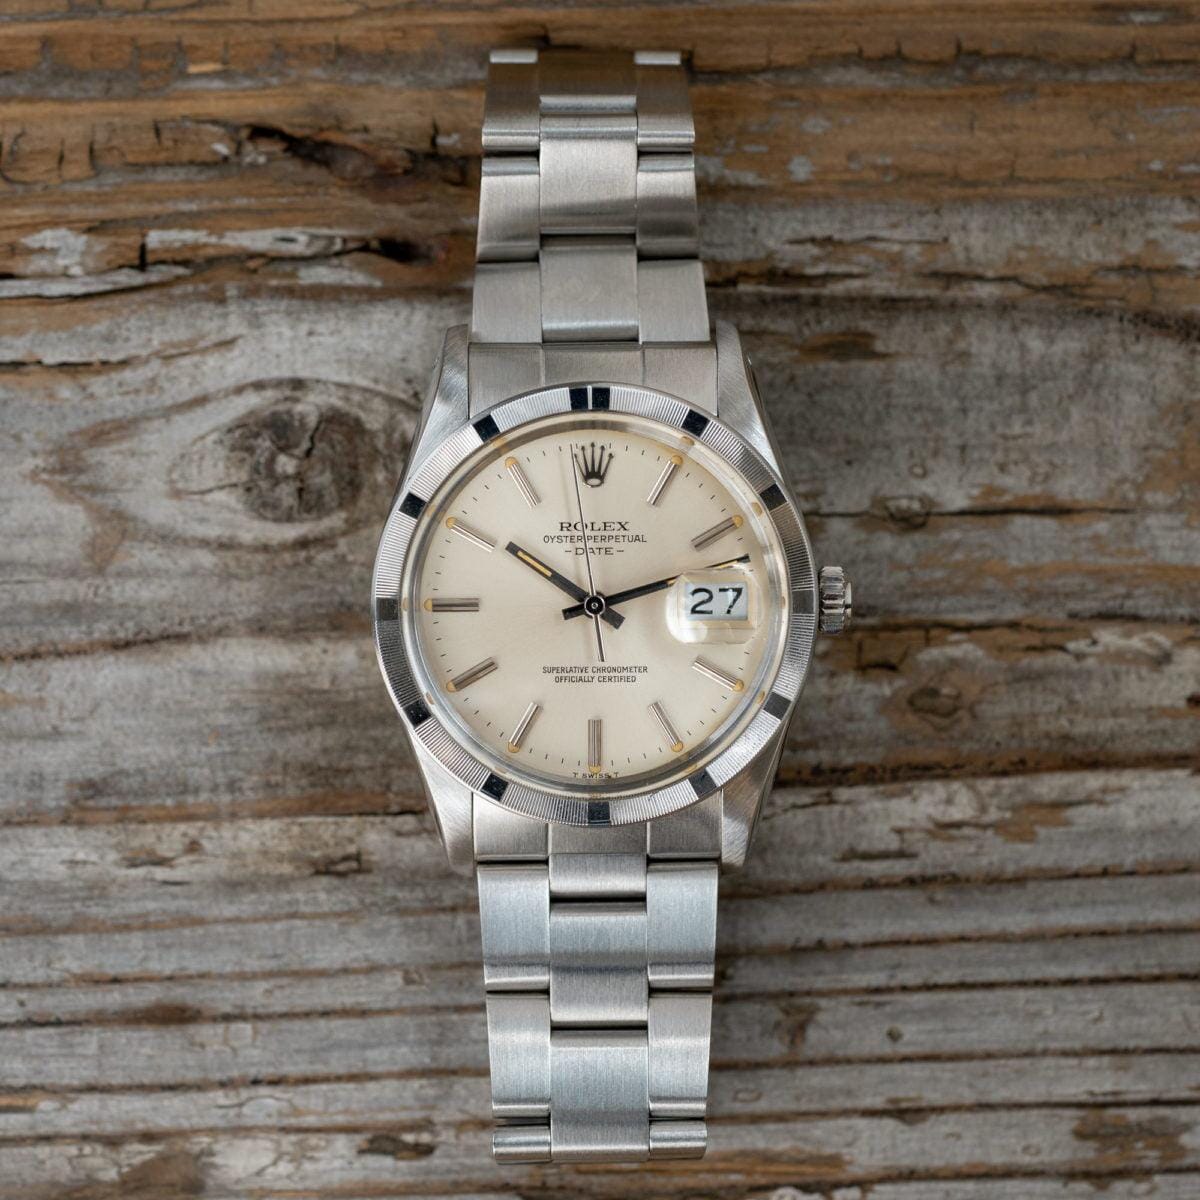 ROLEX Oyster Perpetual Date 15010 Ivory Dial 1980s - Arbitro